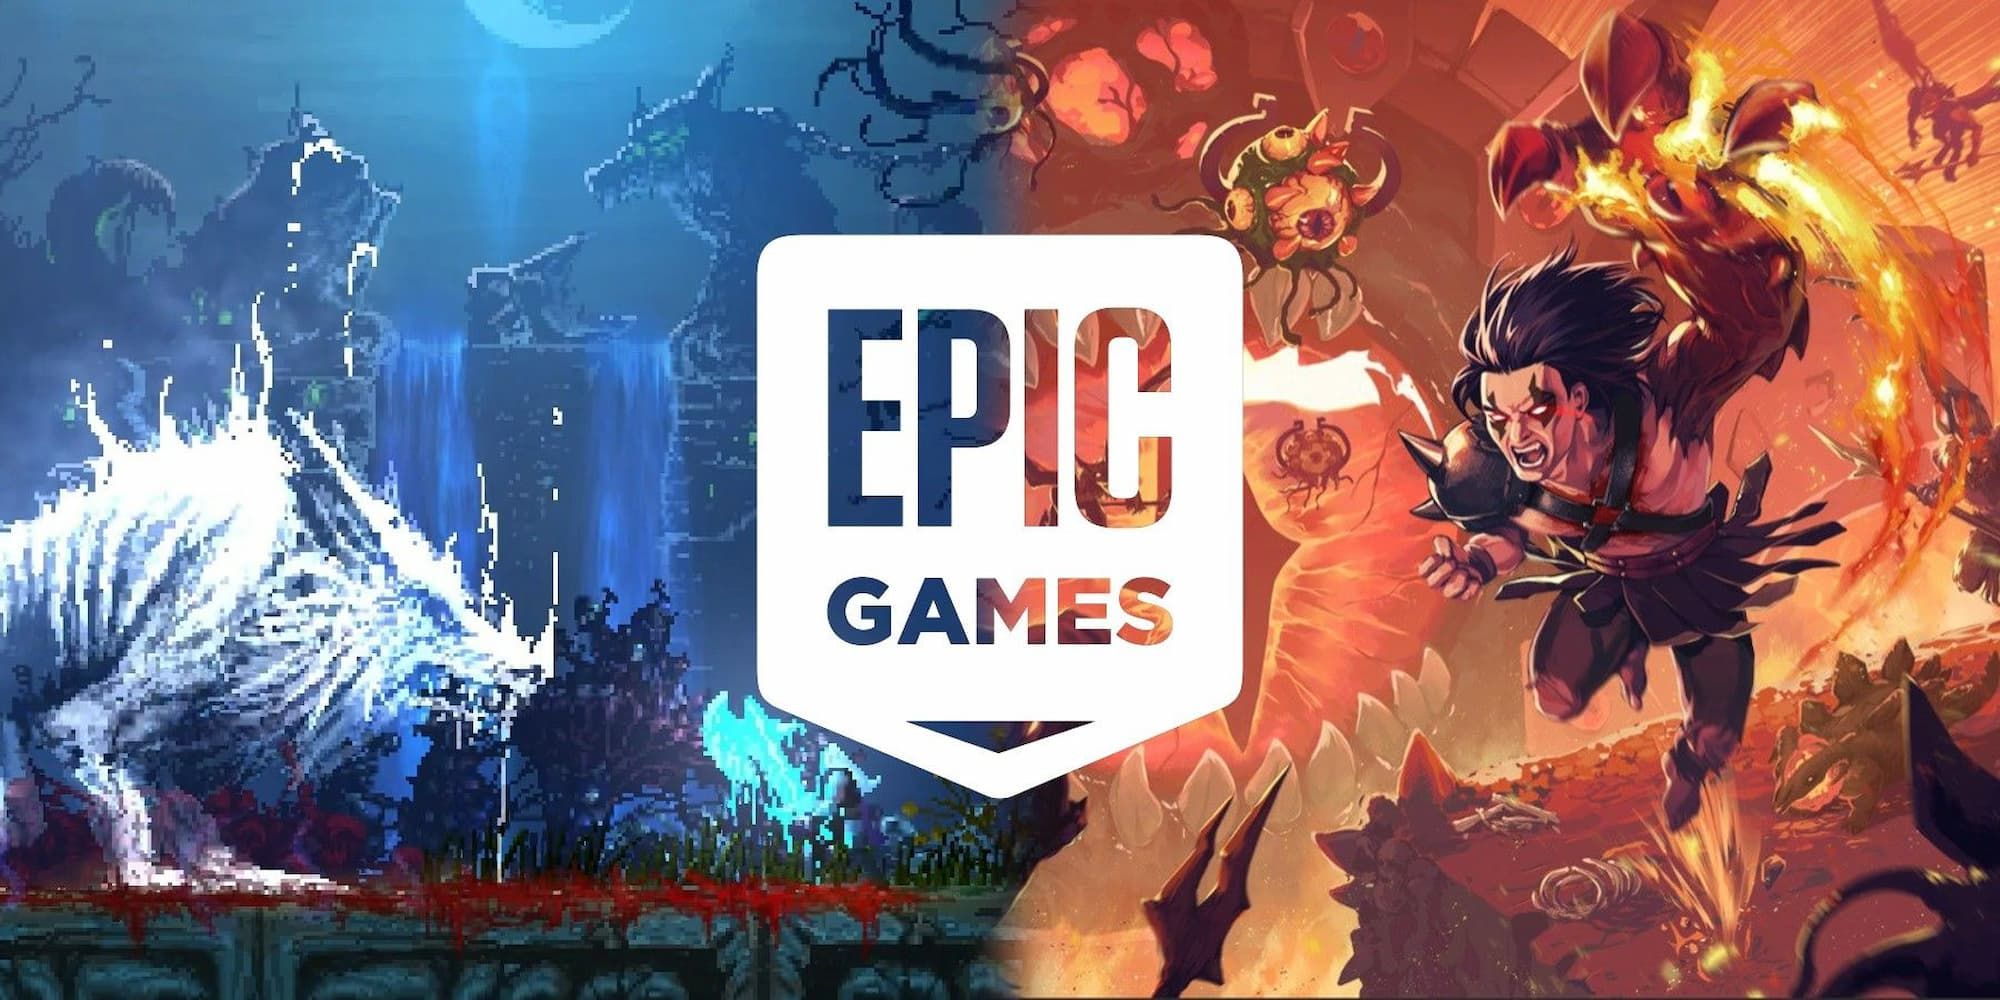 Hell is Others  Download and Buy Today - Epic Games Store